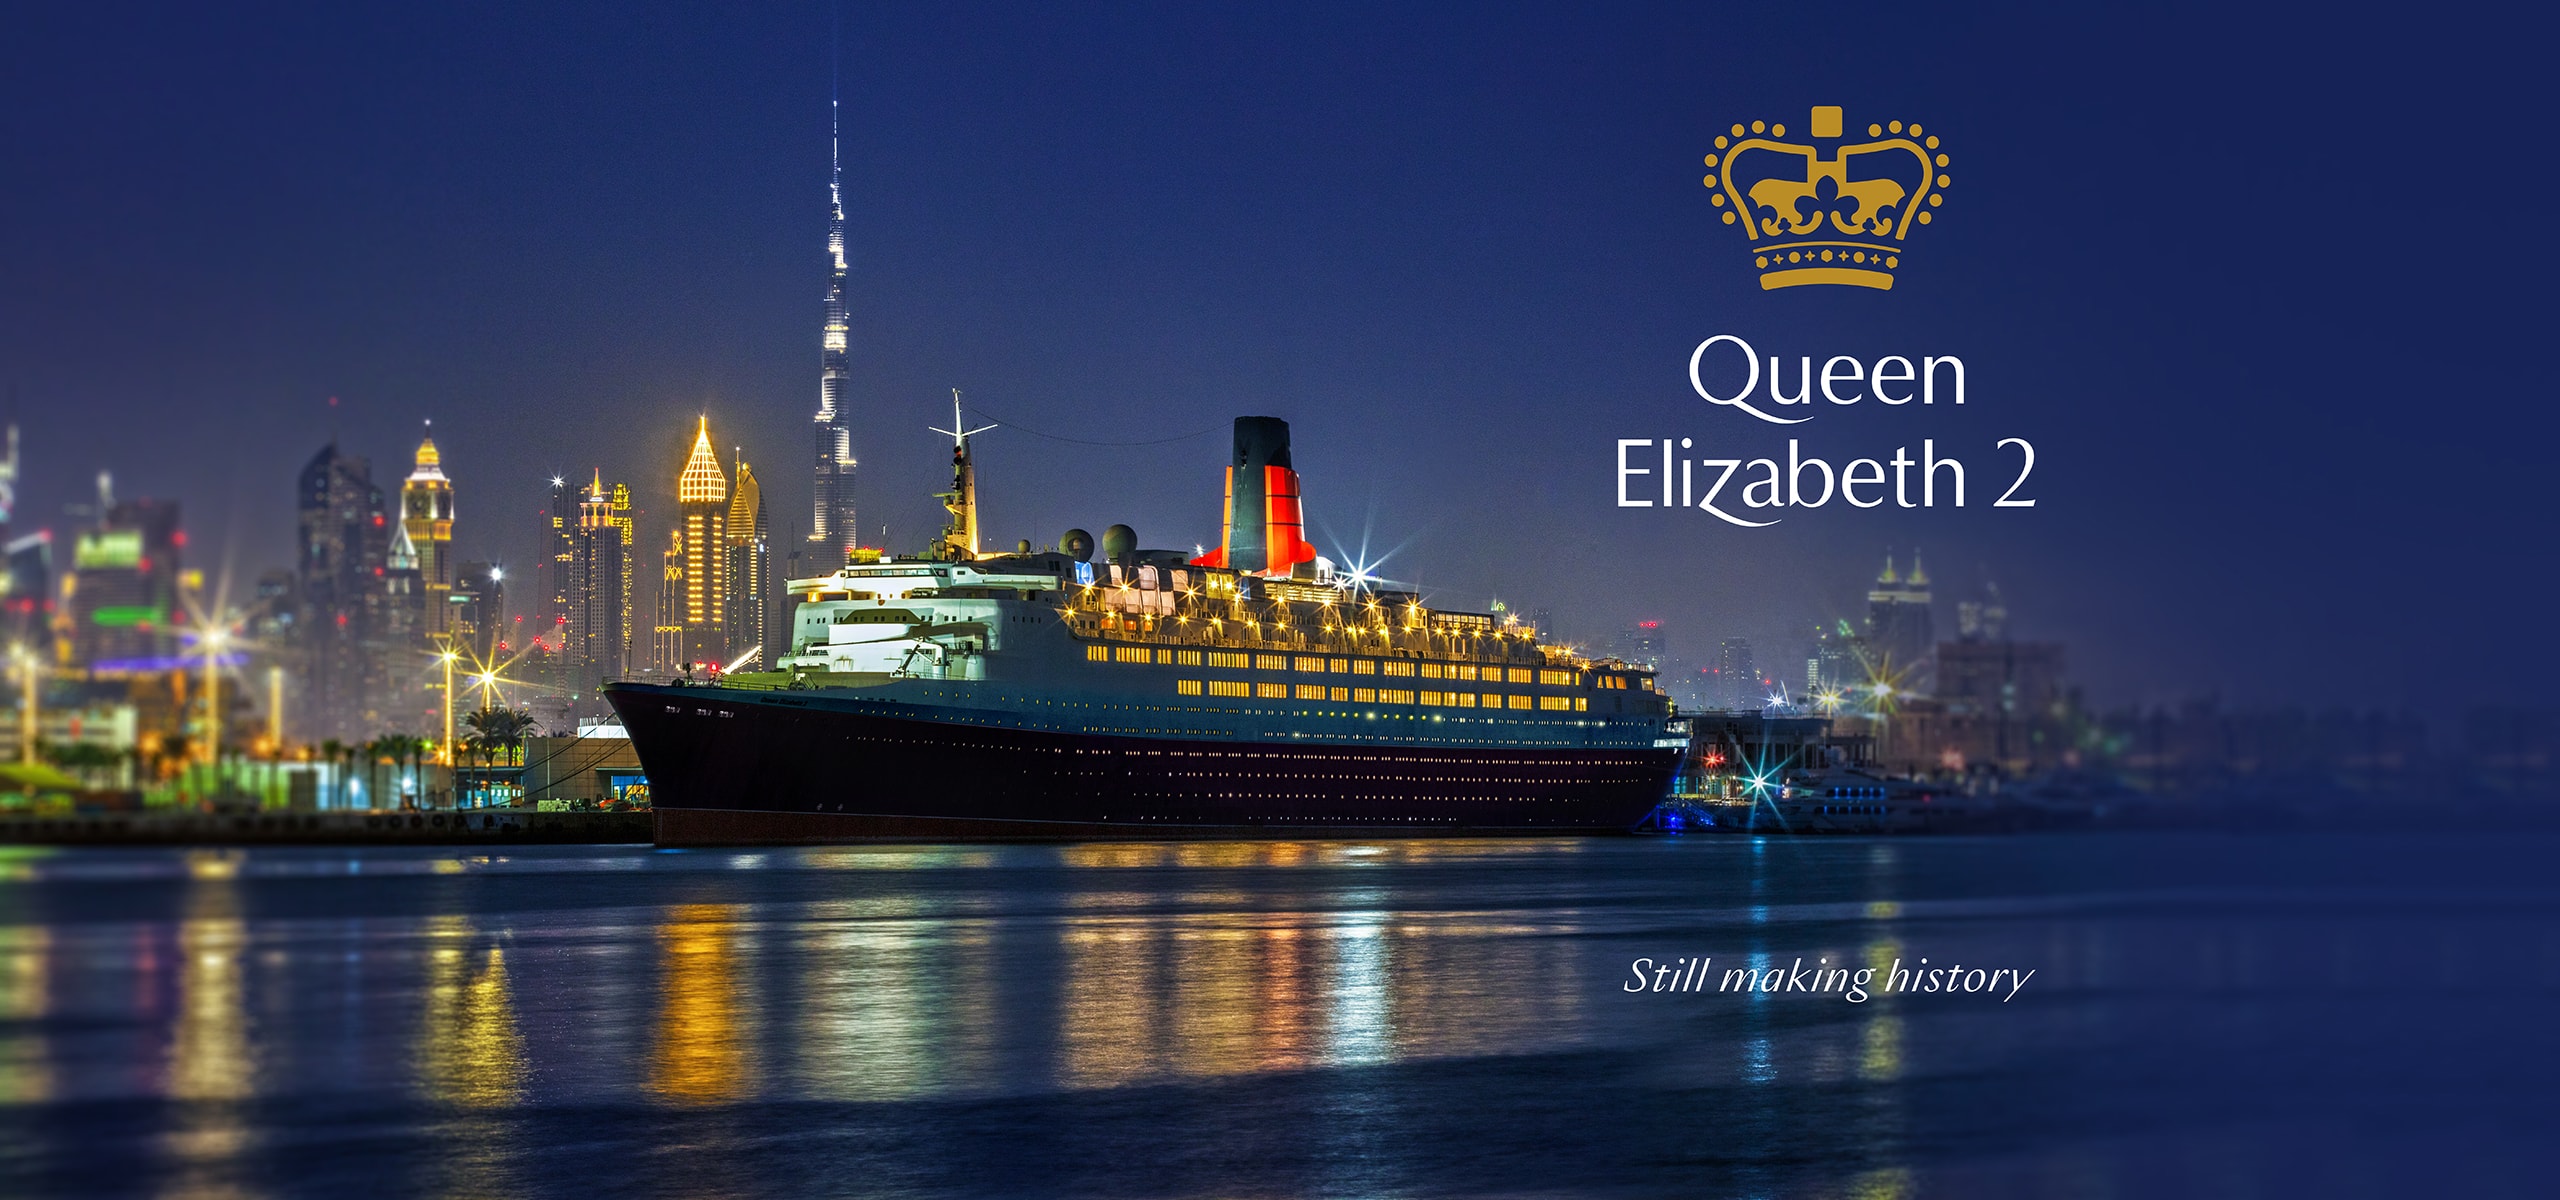 the QE2 anchored in a harbor at nightfall, a Monumental Rebrand for a Maritime Legacy